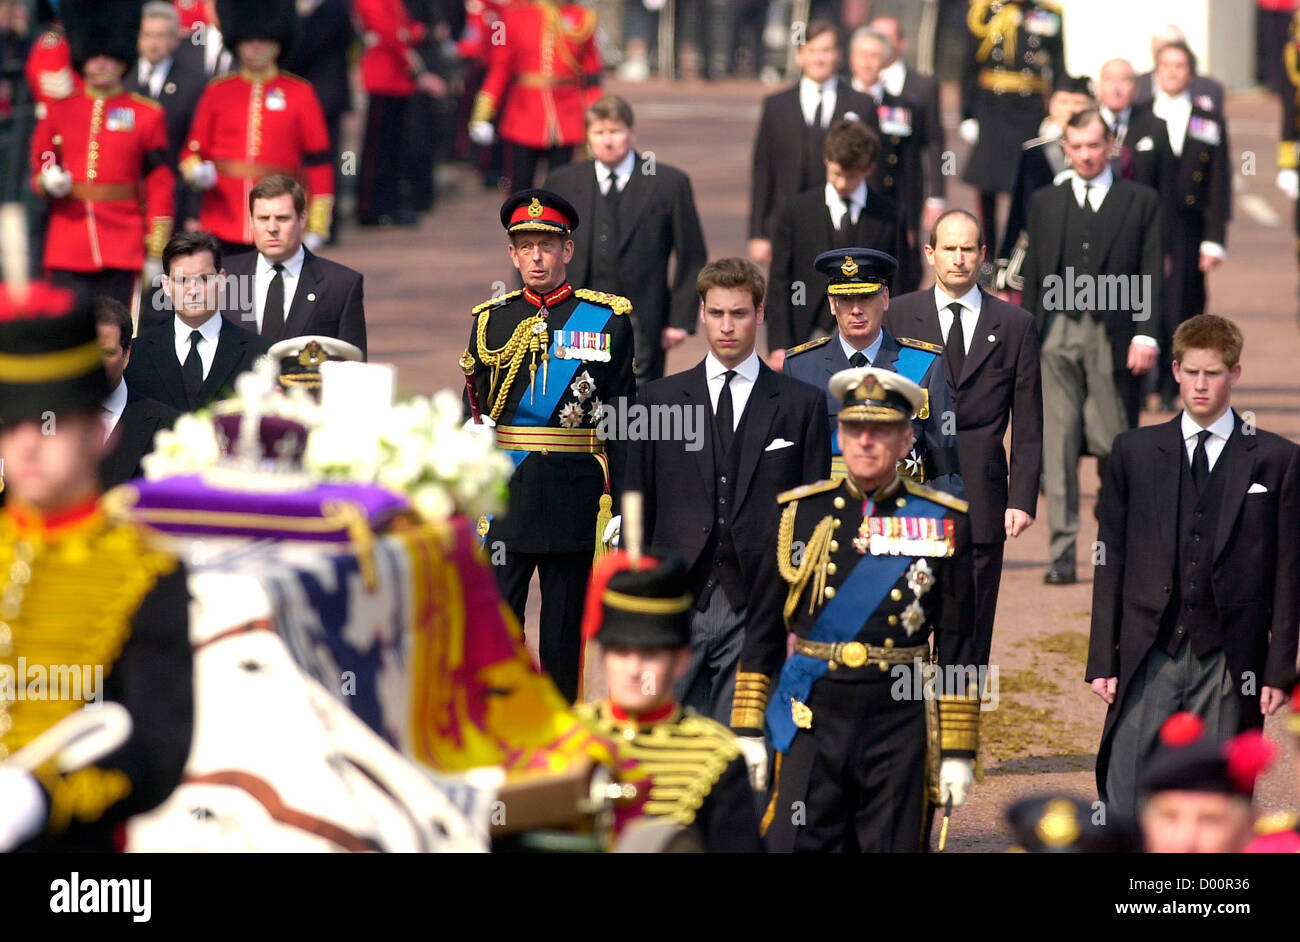 Queen Mothers funeral showing Prince William and Harry, London, UK Stock Photo